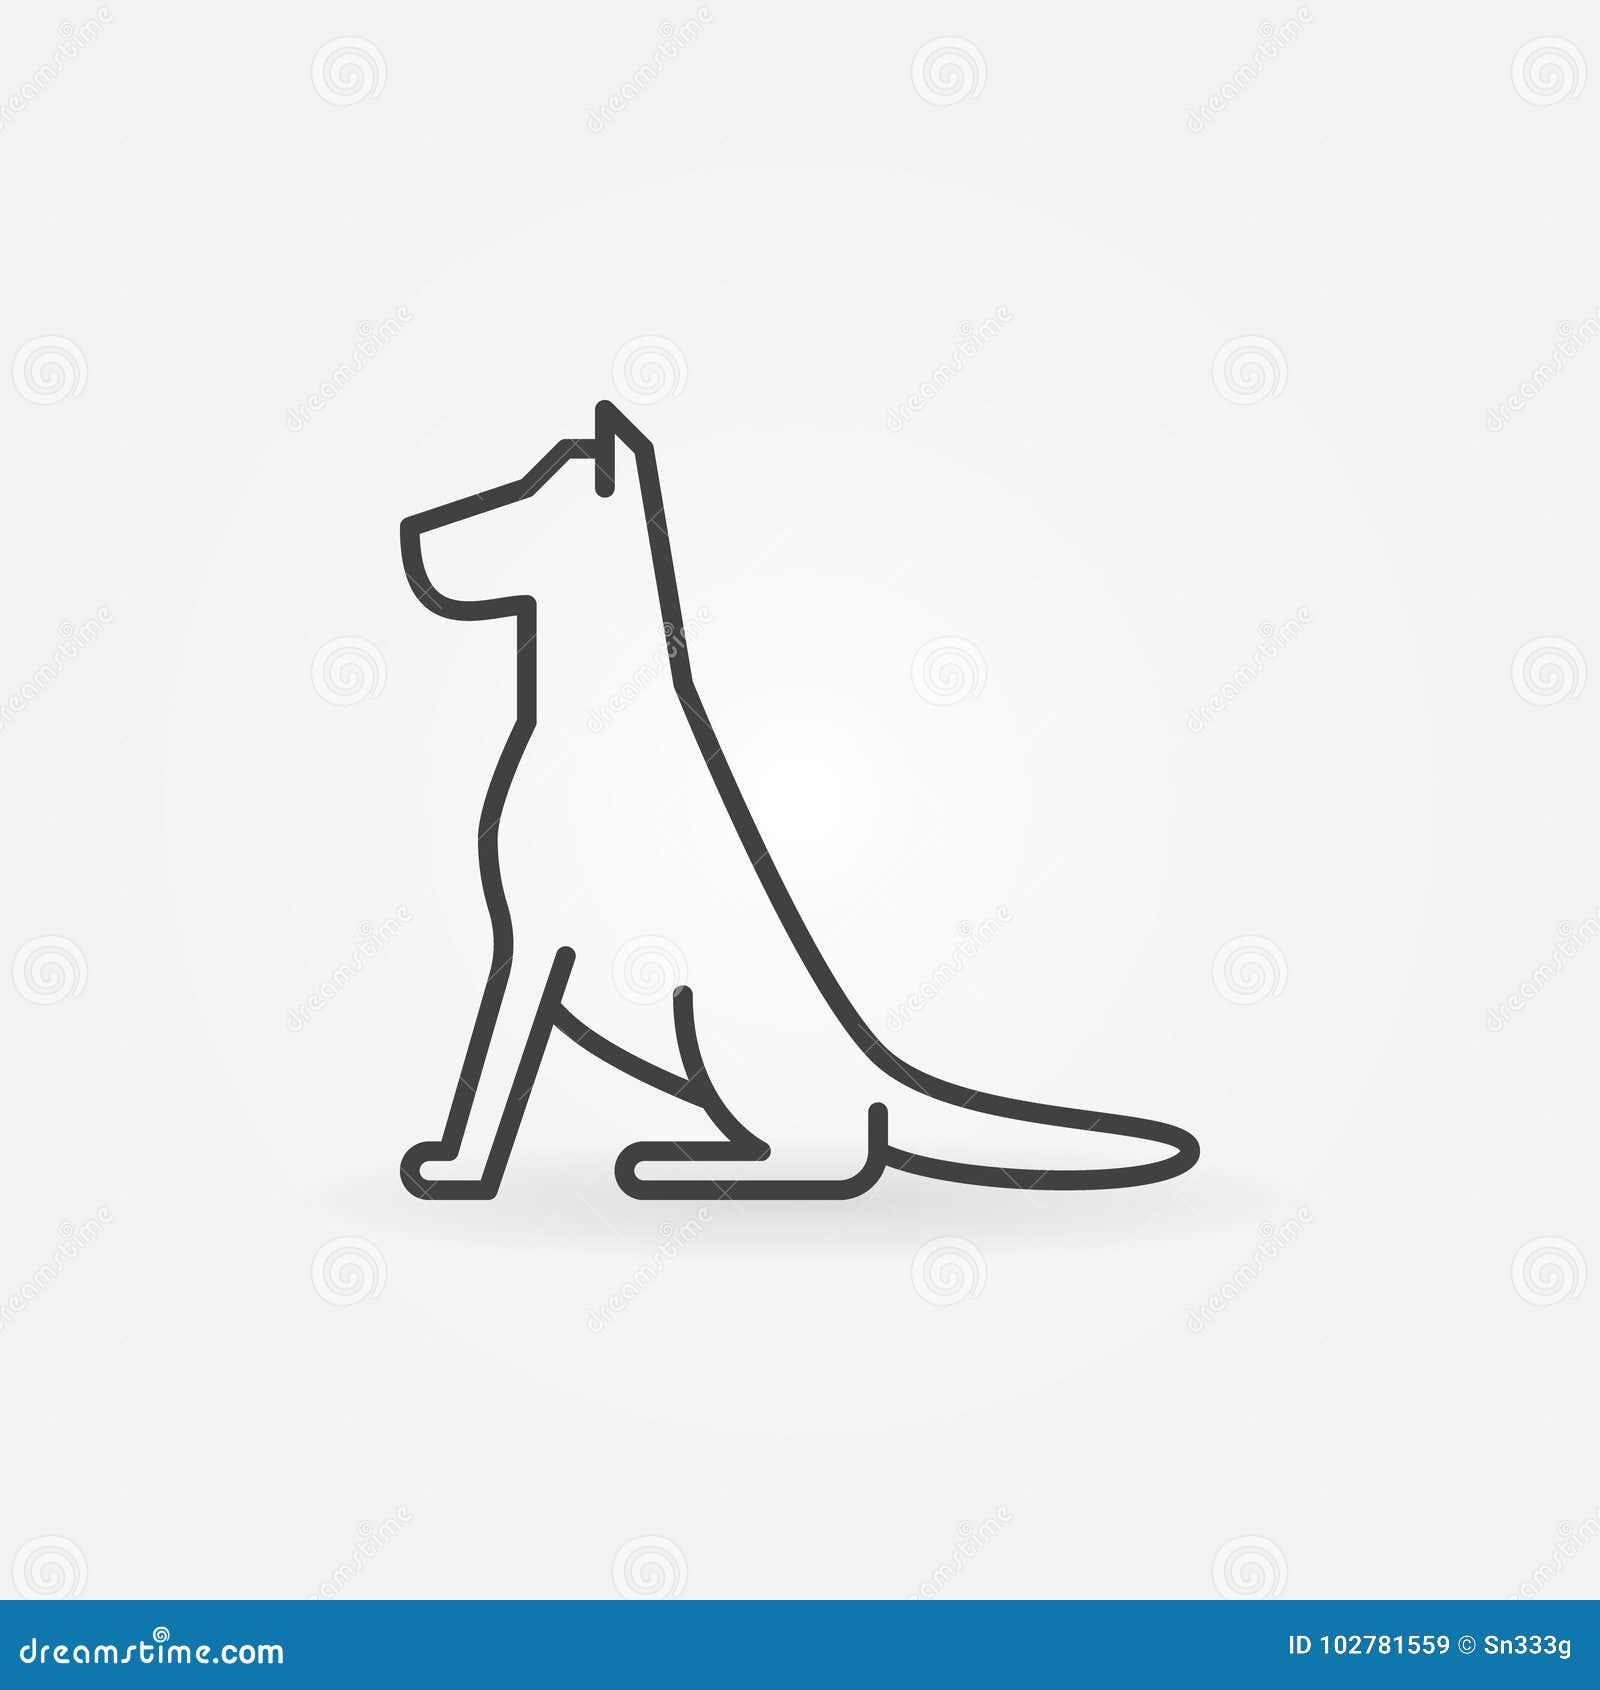 Sitting dog line icon stock vector. Illustration of isolated - 102781559